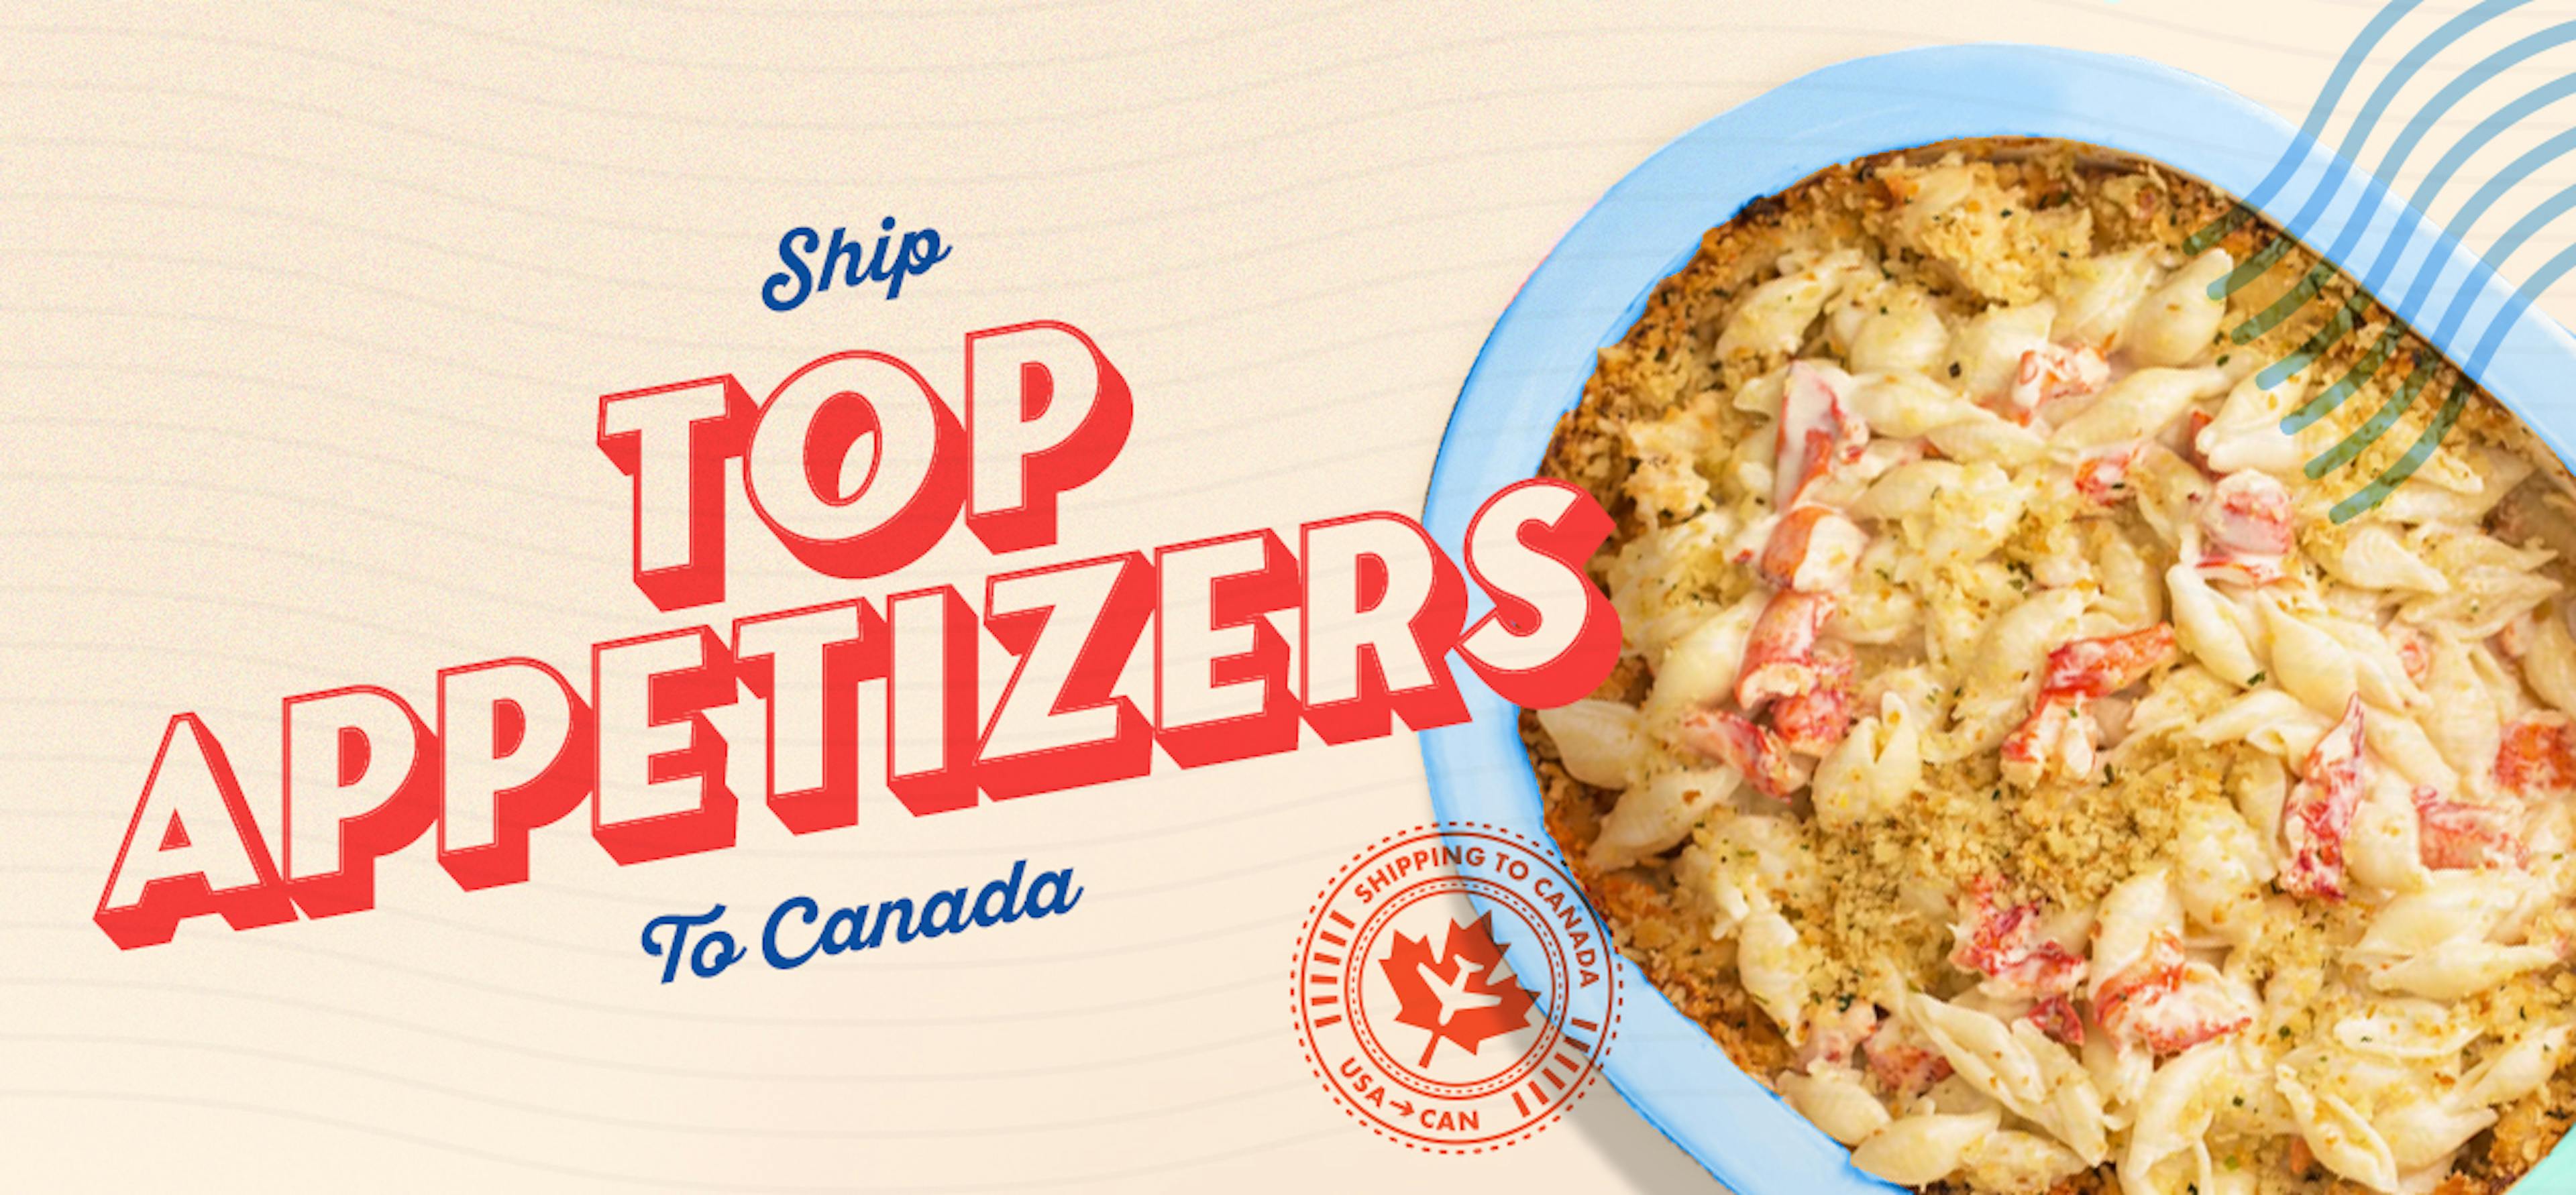 Appetizers that Ship to Canada